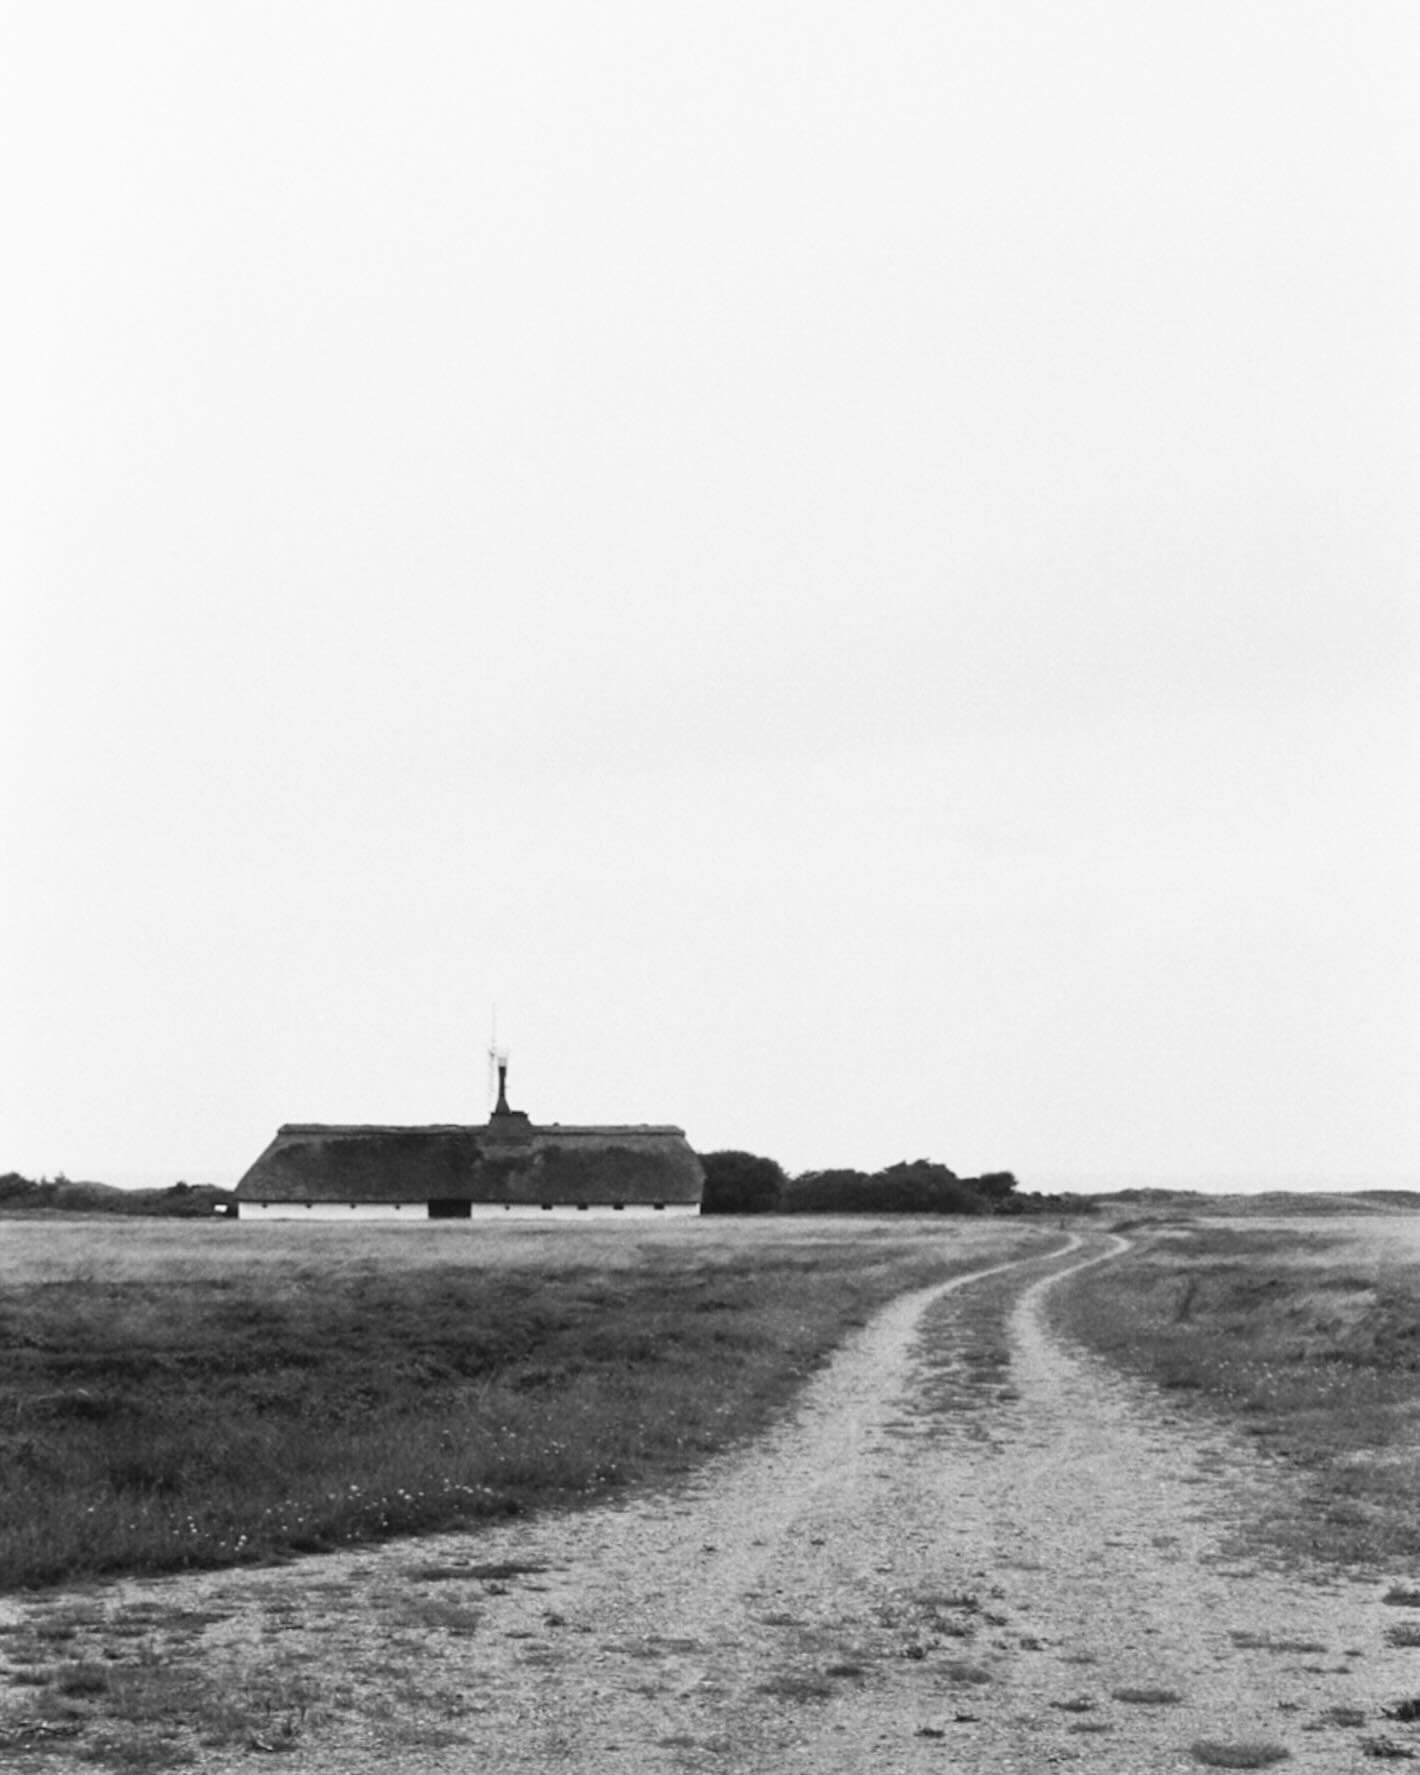 A quiet place somewhere in Denmark. My favorite.
.
.
.
#memorycult #analogtravel #ilfordphoto #travelphotography #lostplaces #immemorymag #womenwhoshootfilm #traveldocumentary #inspiralabfeature #inspiralab